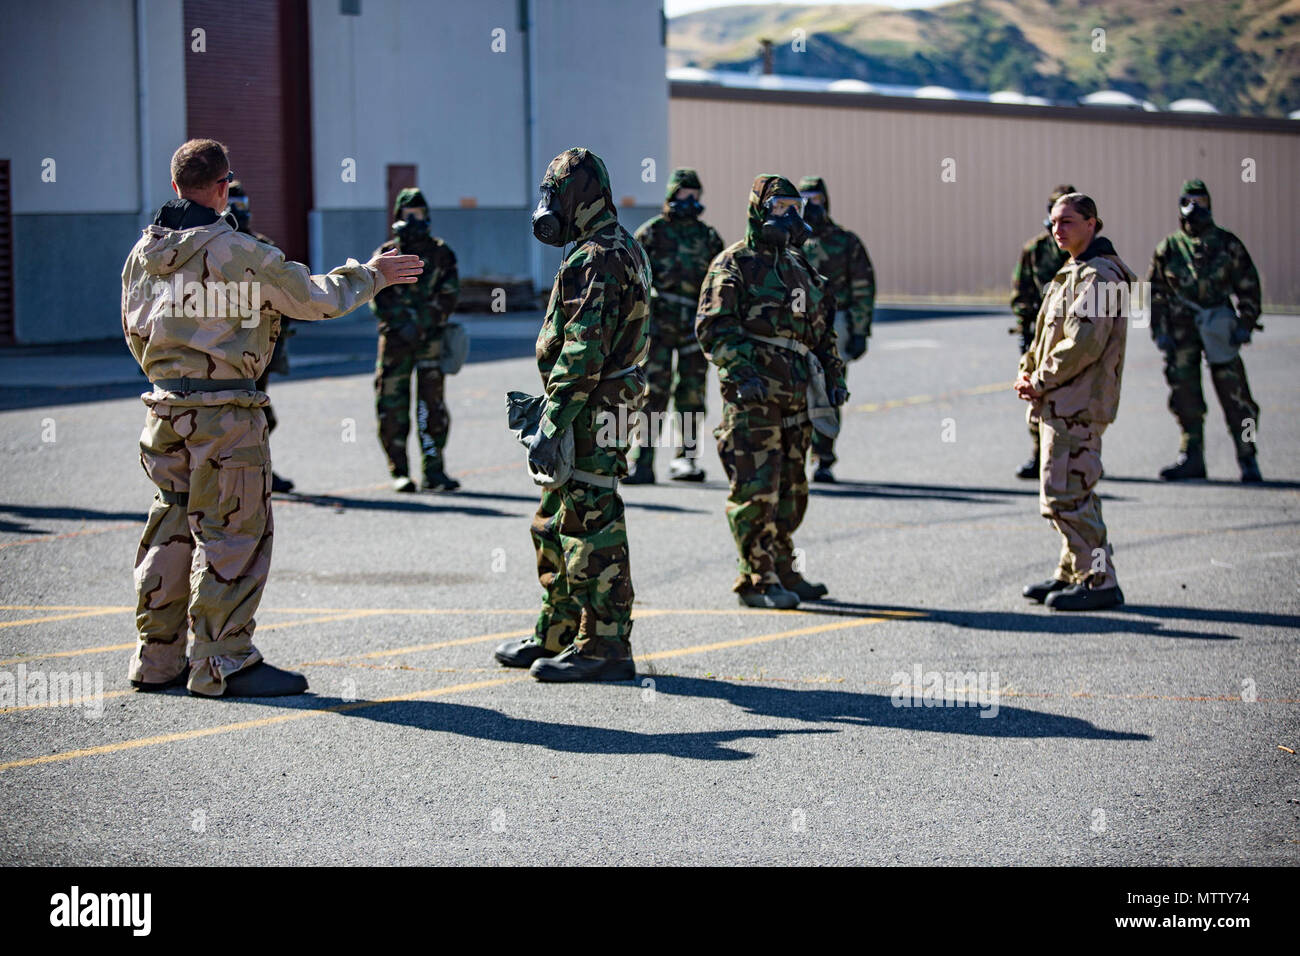 U.S. Marine Staff Sgt. Philip Barnes (left) instructs trainees in order to conduct the Reconnaissance, Surveillance and Decontamination Training aboard Marine Corps Base Camp Pendleton, Calif., April 26, 2017. Barnes goes over different safety precautions, prior to the trainees separating into their different training groups. The purpose of this training is to accomplish missions within a chemical, biological, radiological and nuclear environment.  Barnes is the current CBRN chief for 1st Maintenance Battalion, 1st Marine Logistics Group. Stock Photo